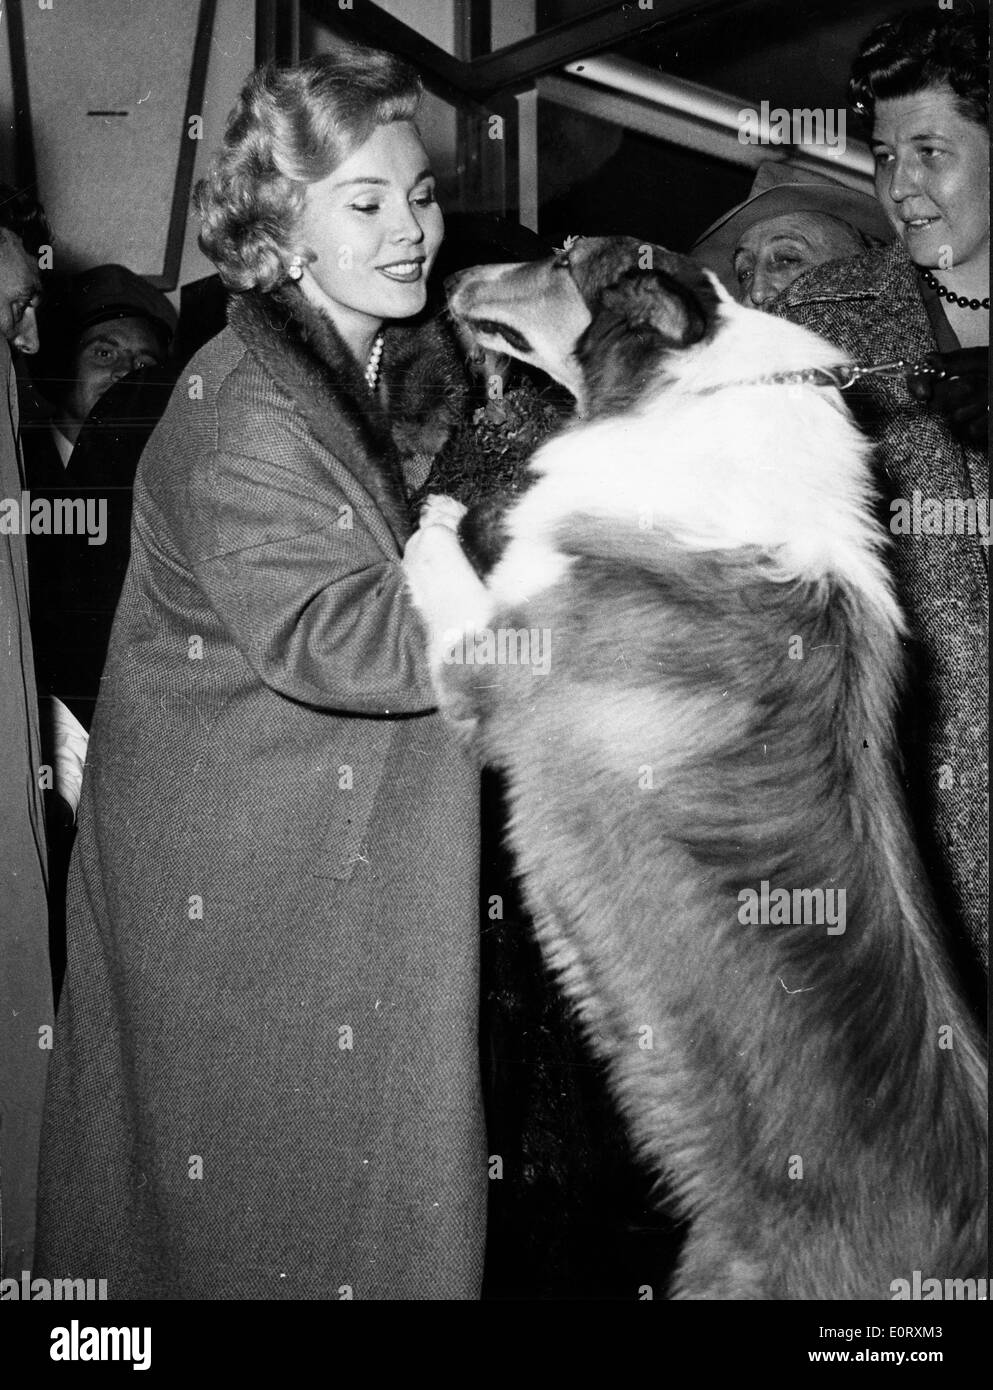 Zsa Zsa Gabor with a dog Stock Photo